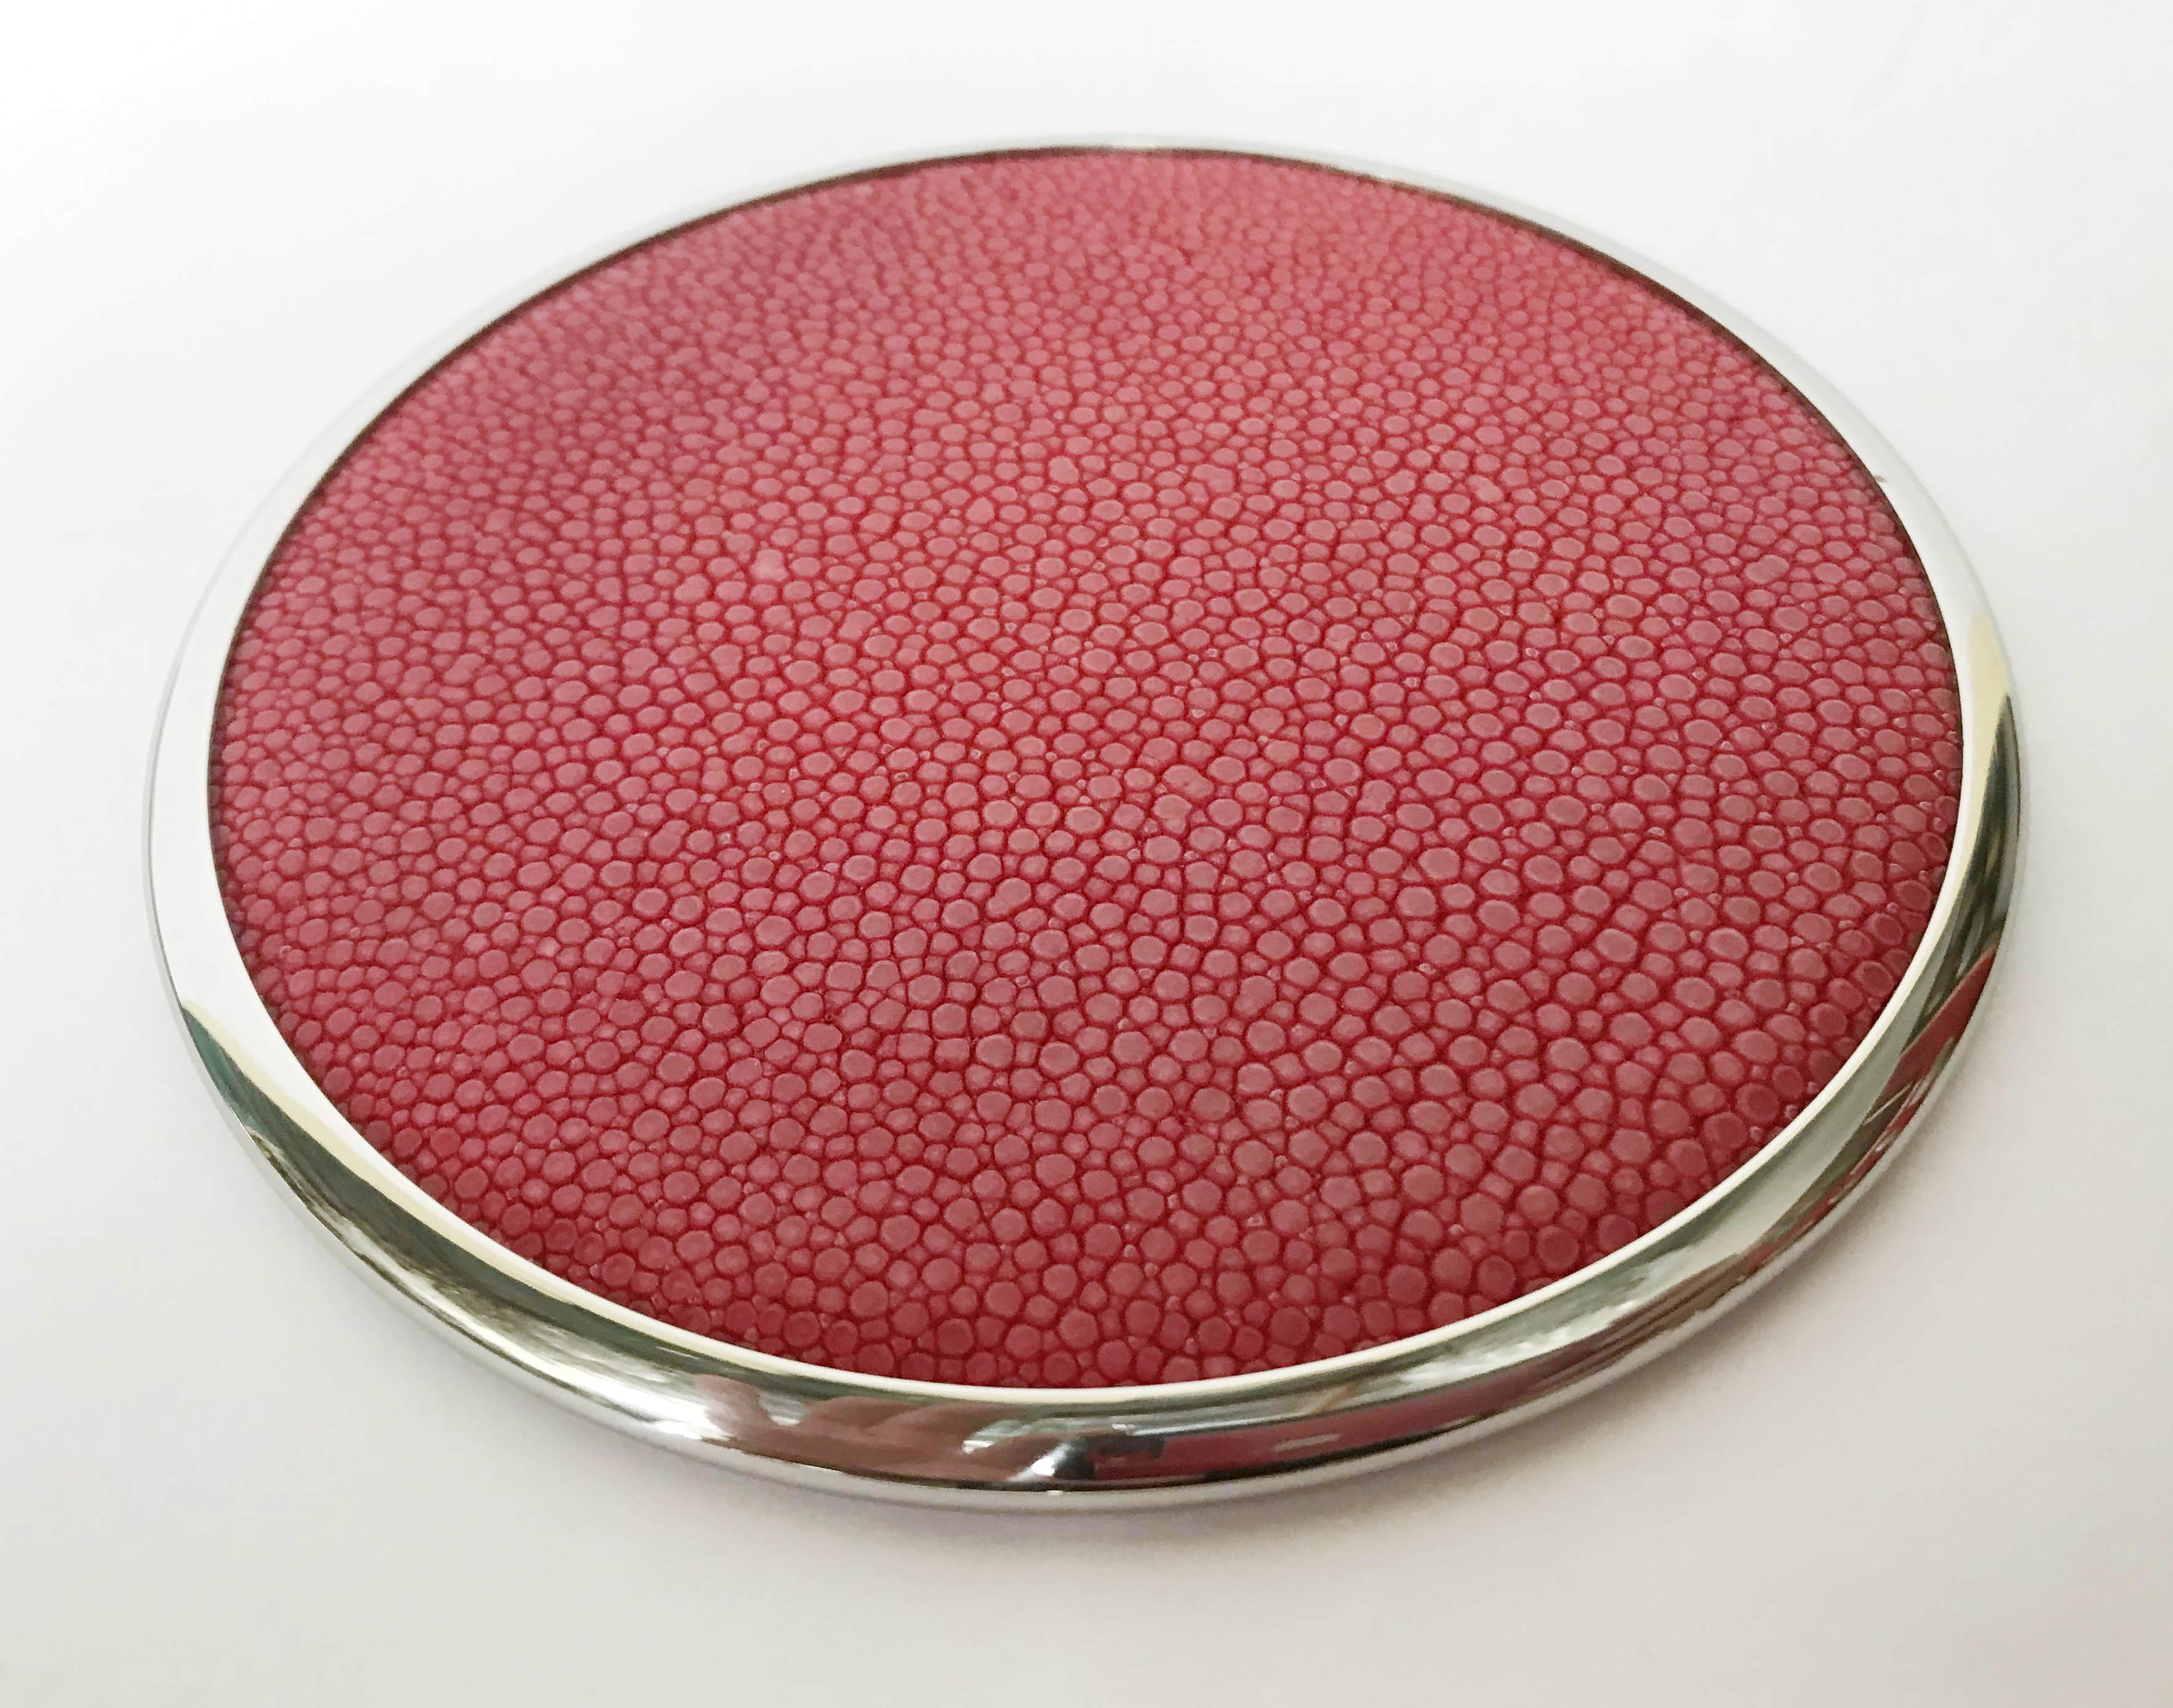 Plated Set of Twelve Red Shagreen Coasters by Fabio Ltd - LAST 1 IN STOCK